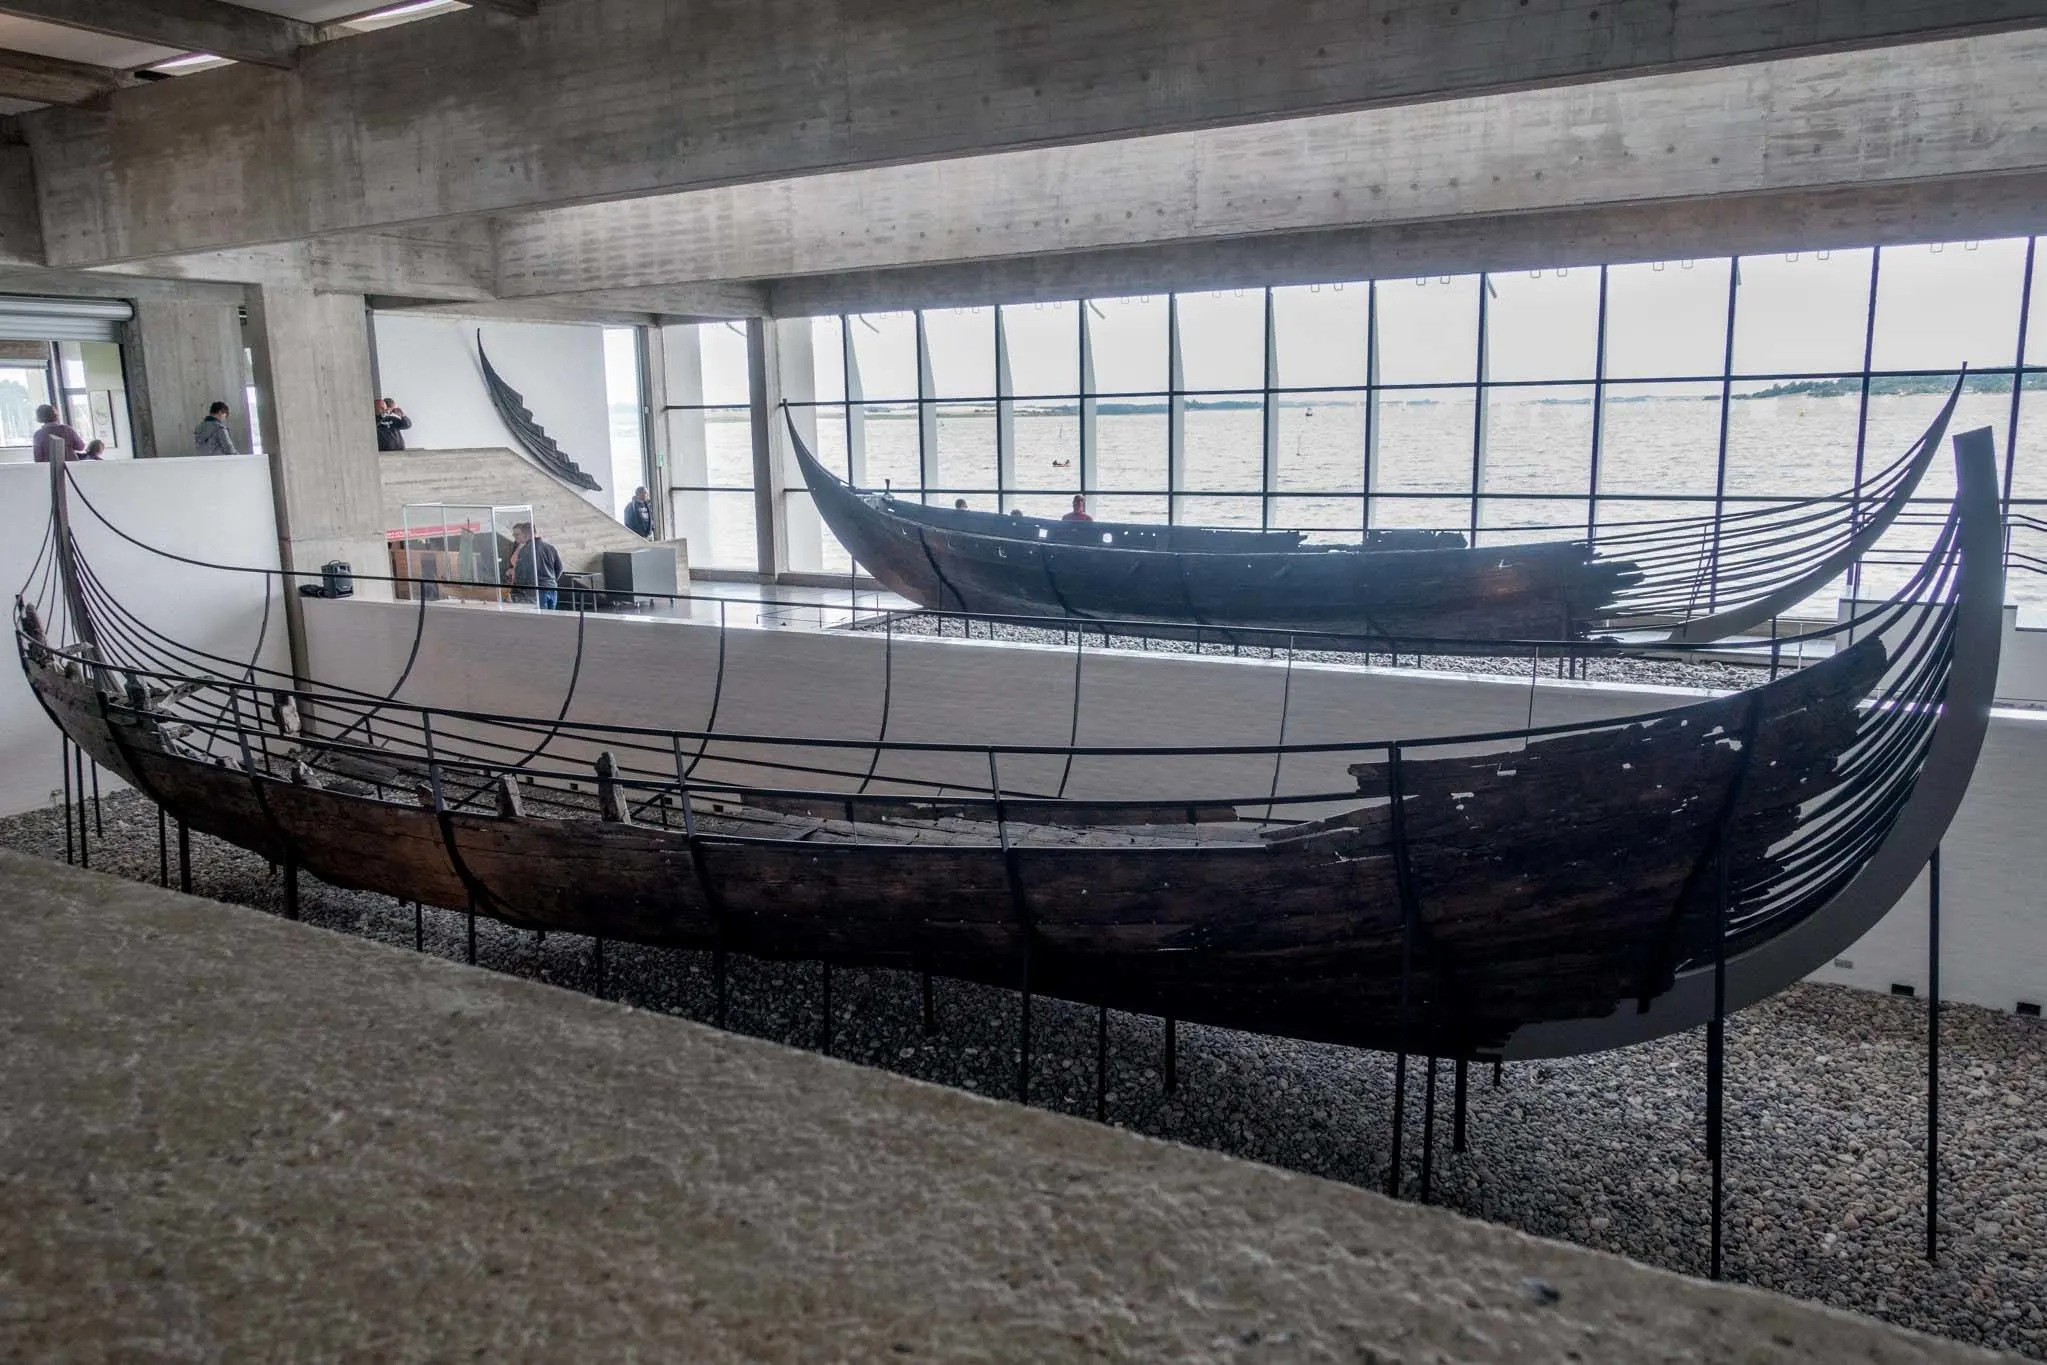 Remains of two wooden Viking ships